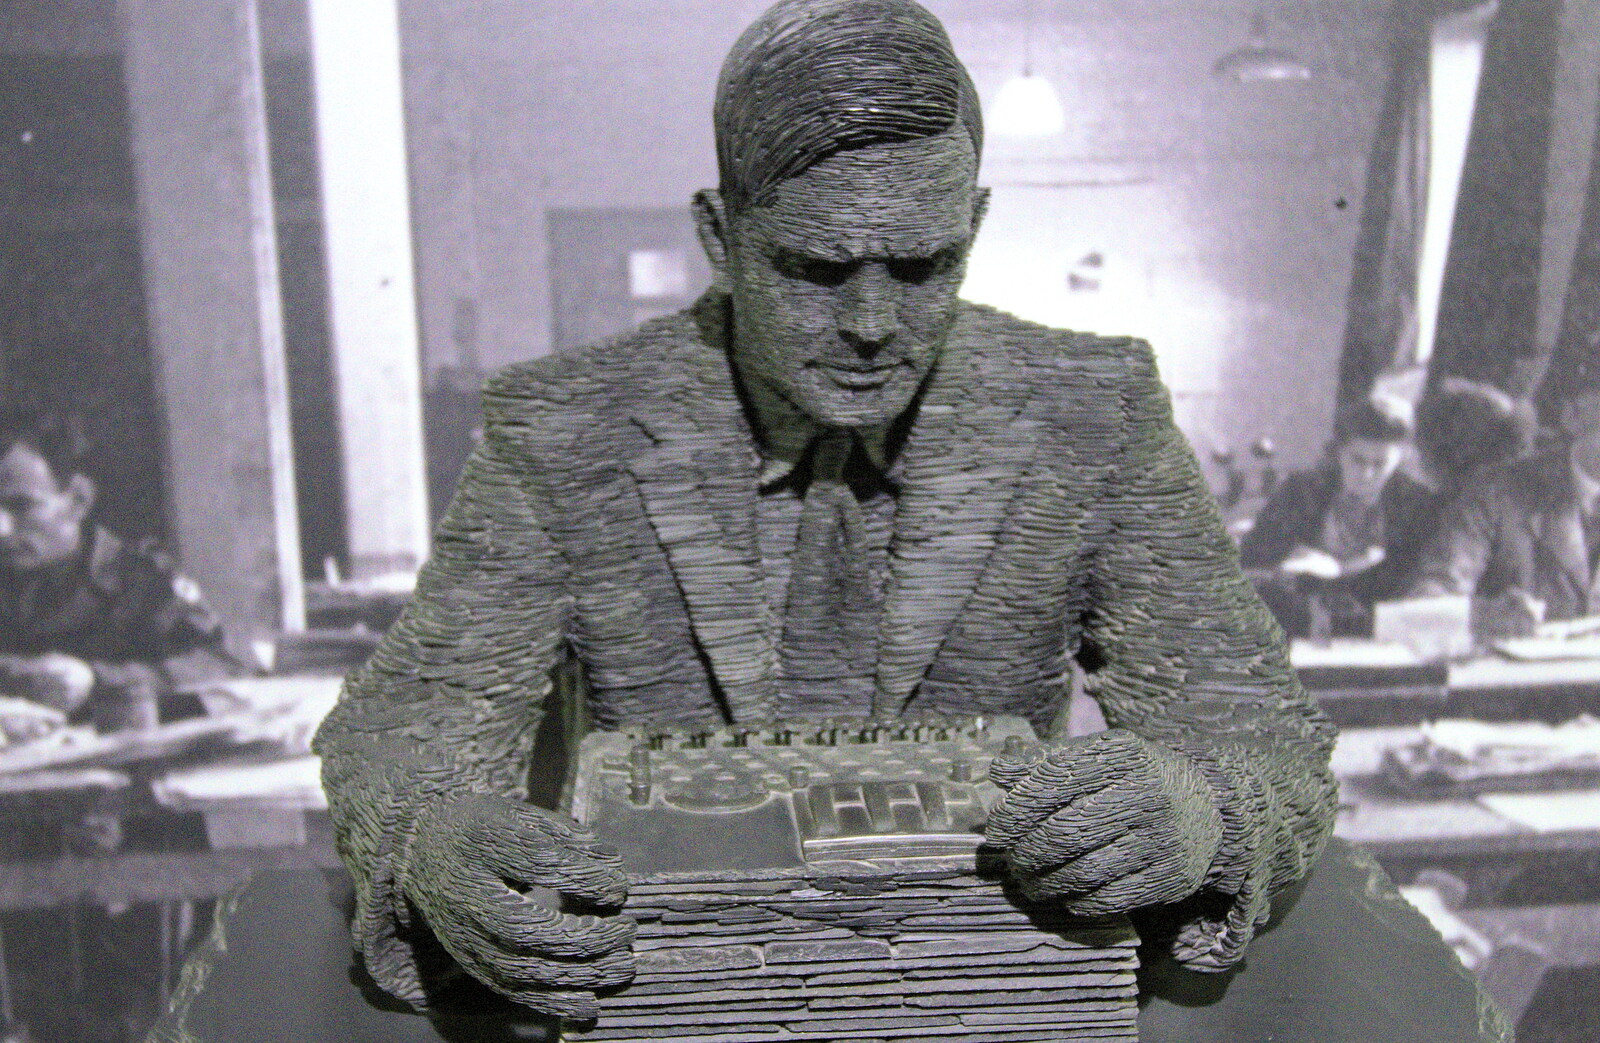 A slate statue of Alan Turing from TouchType does Bletchley Park, Bletchley, Bedfordshire - 20th July 2012